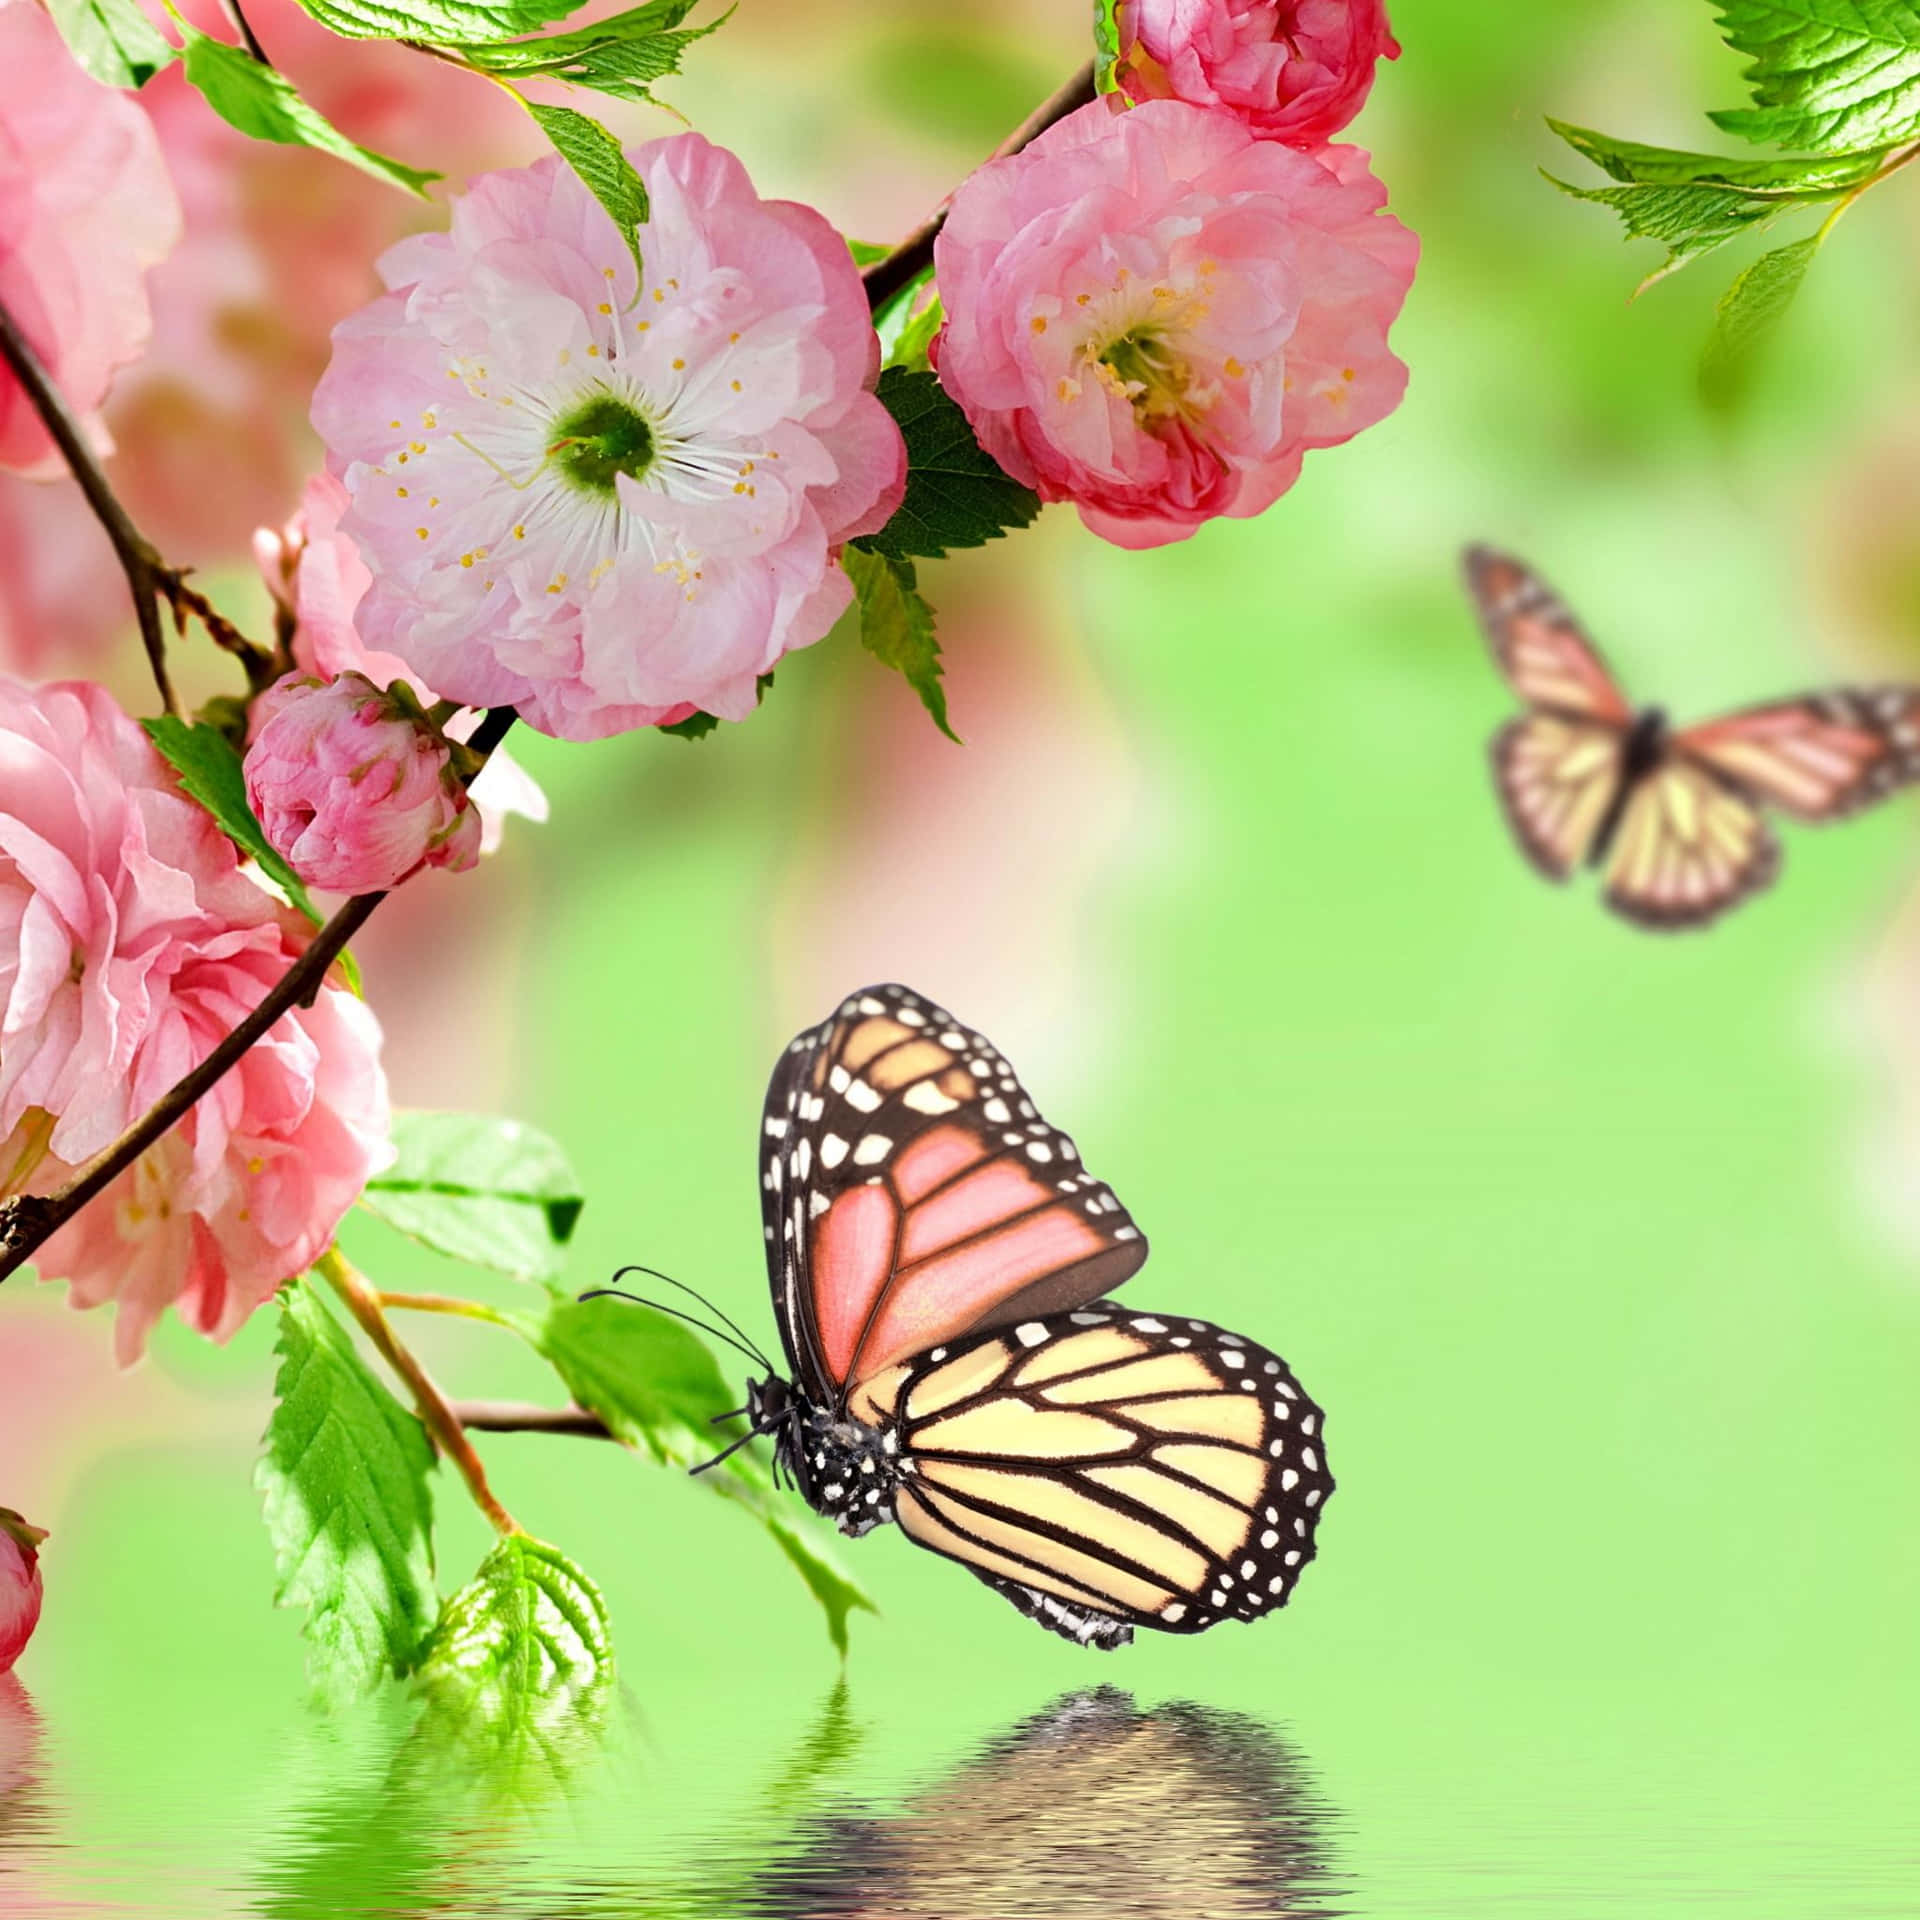 Enjoy the freshness of Spring with an iPad Wallpaper